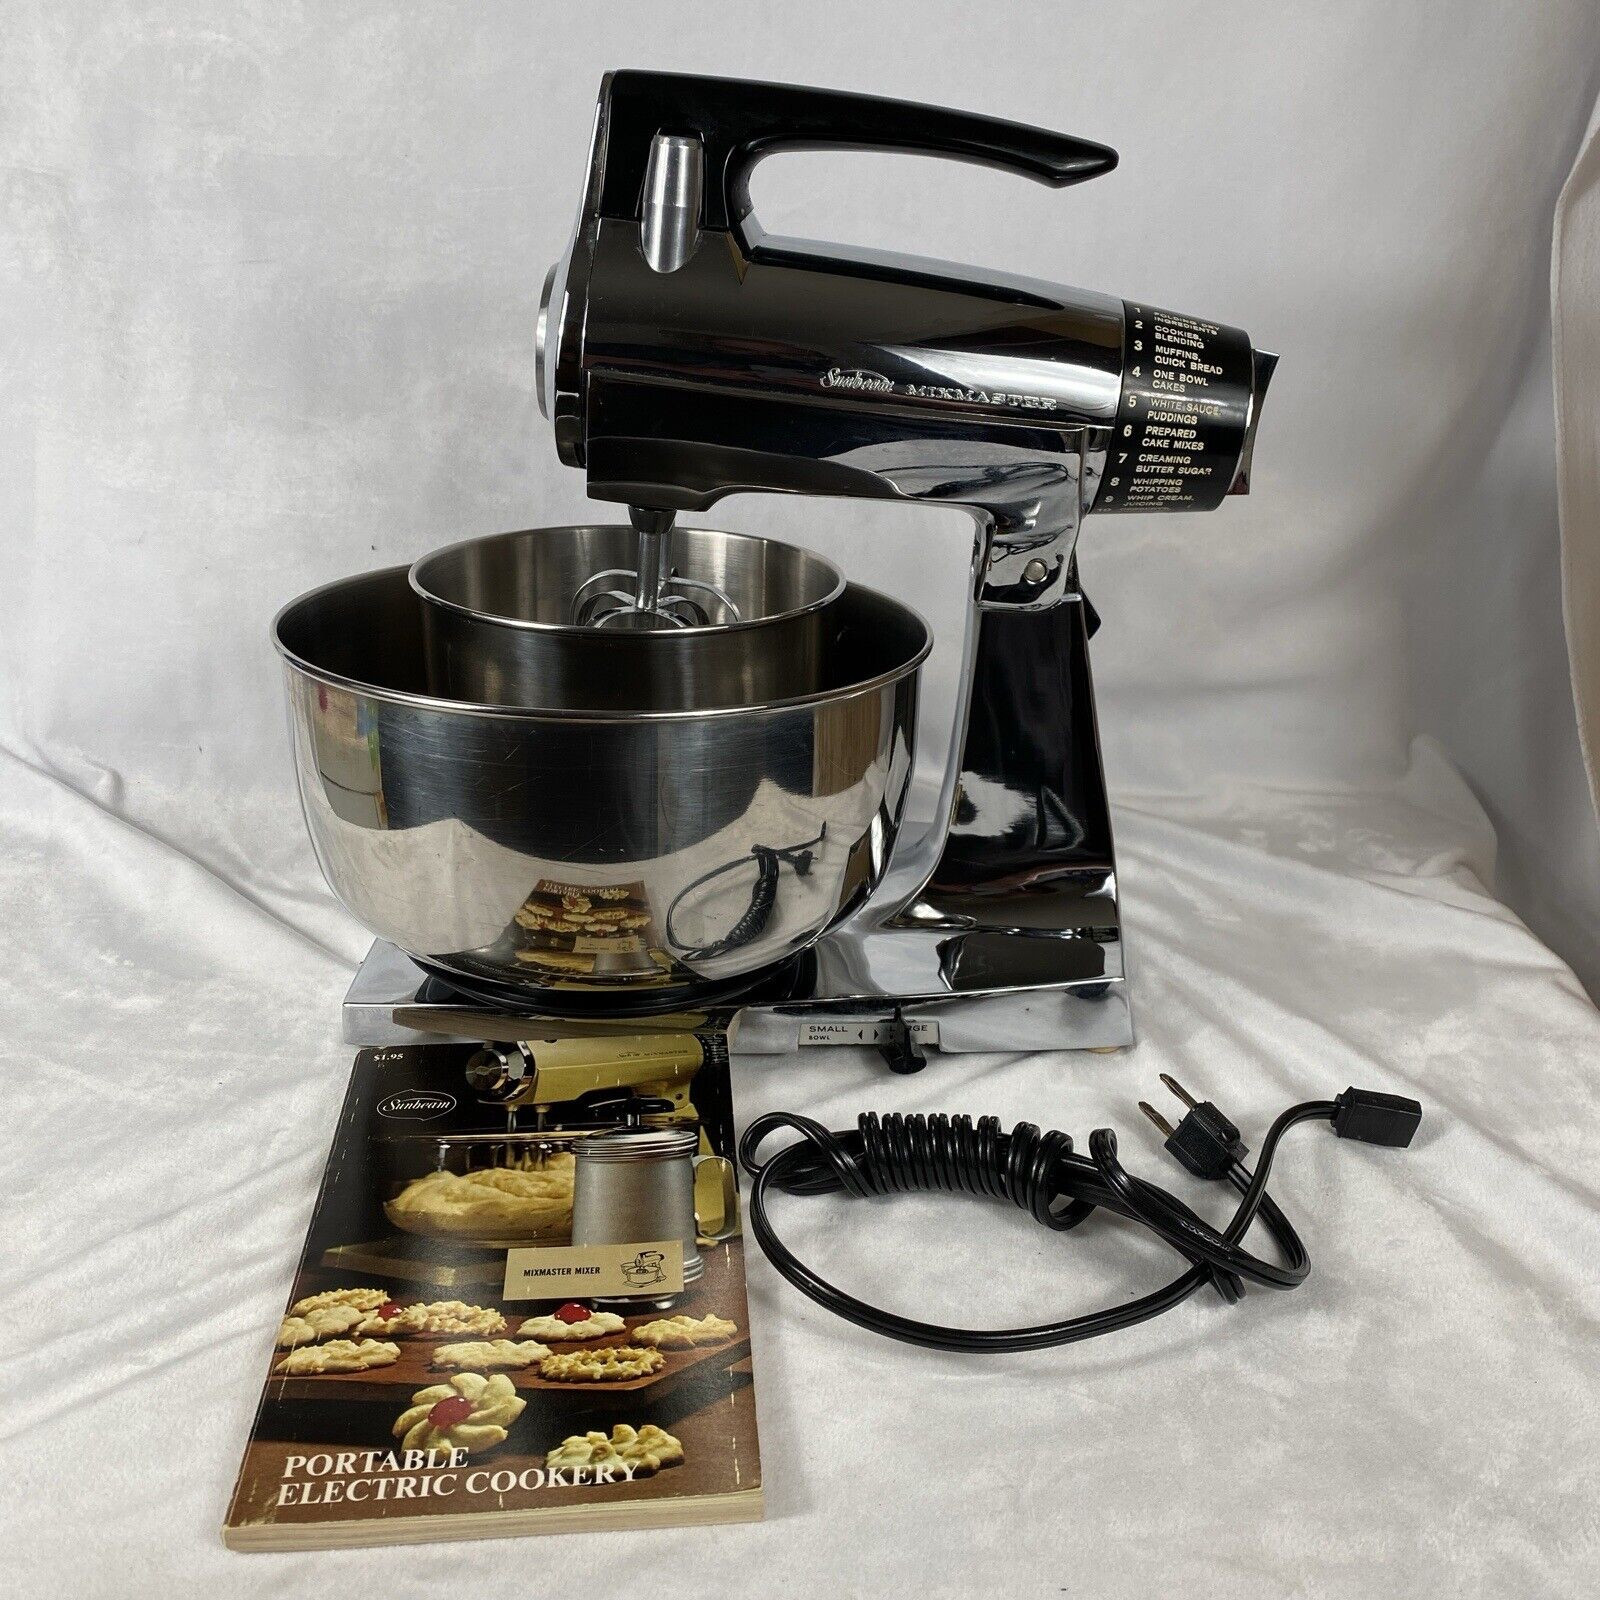 Vintage Chrome Sunbeam Mixmaster 12 Speed Stand Mixer w/ Bowls & Beaters, Works